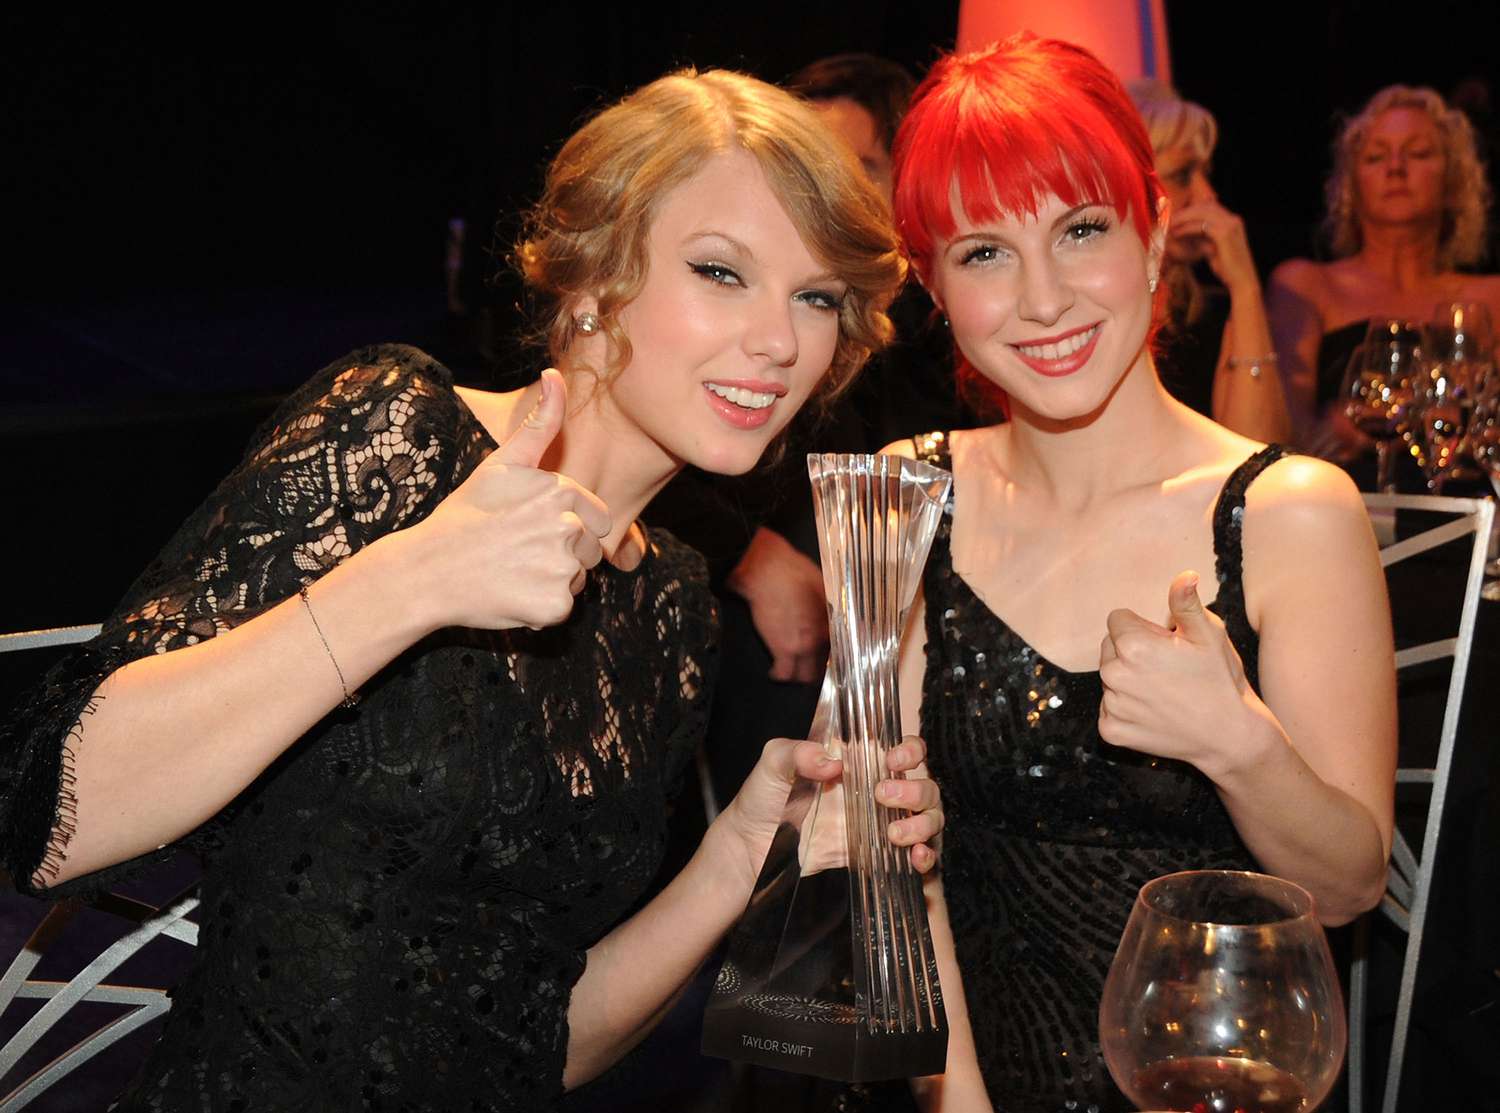 Honoree Taylor Swift and Recording Artists Hayley Williams of the group Paramore and Kid Rock at the CMT Artists of the Year at The Factory on November 30, 2010 in Franklin, Tennessee.